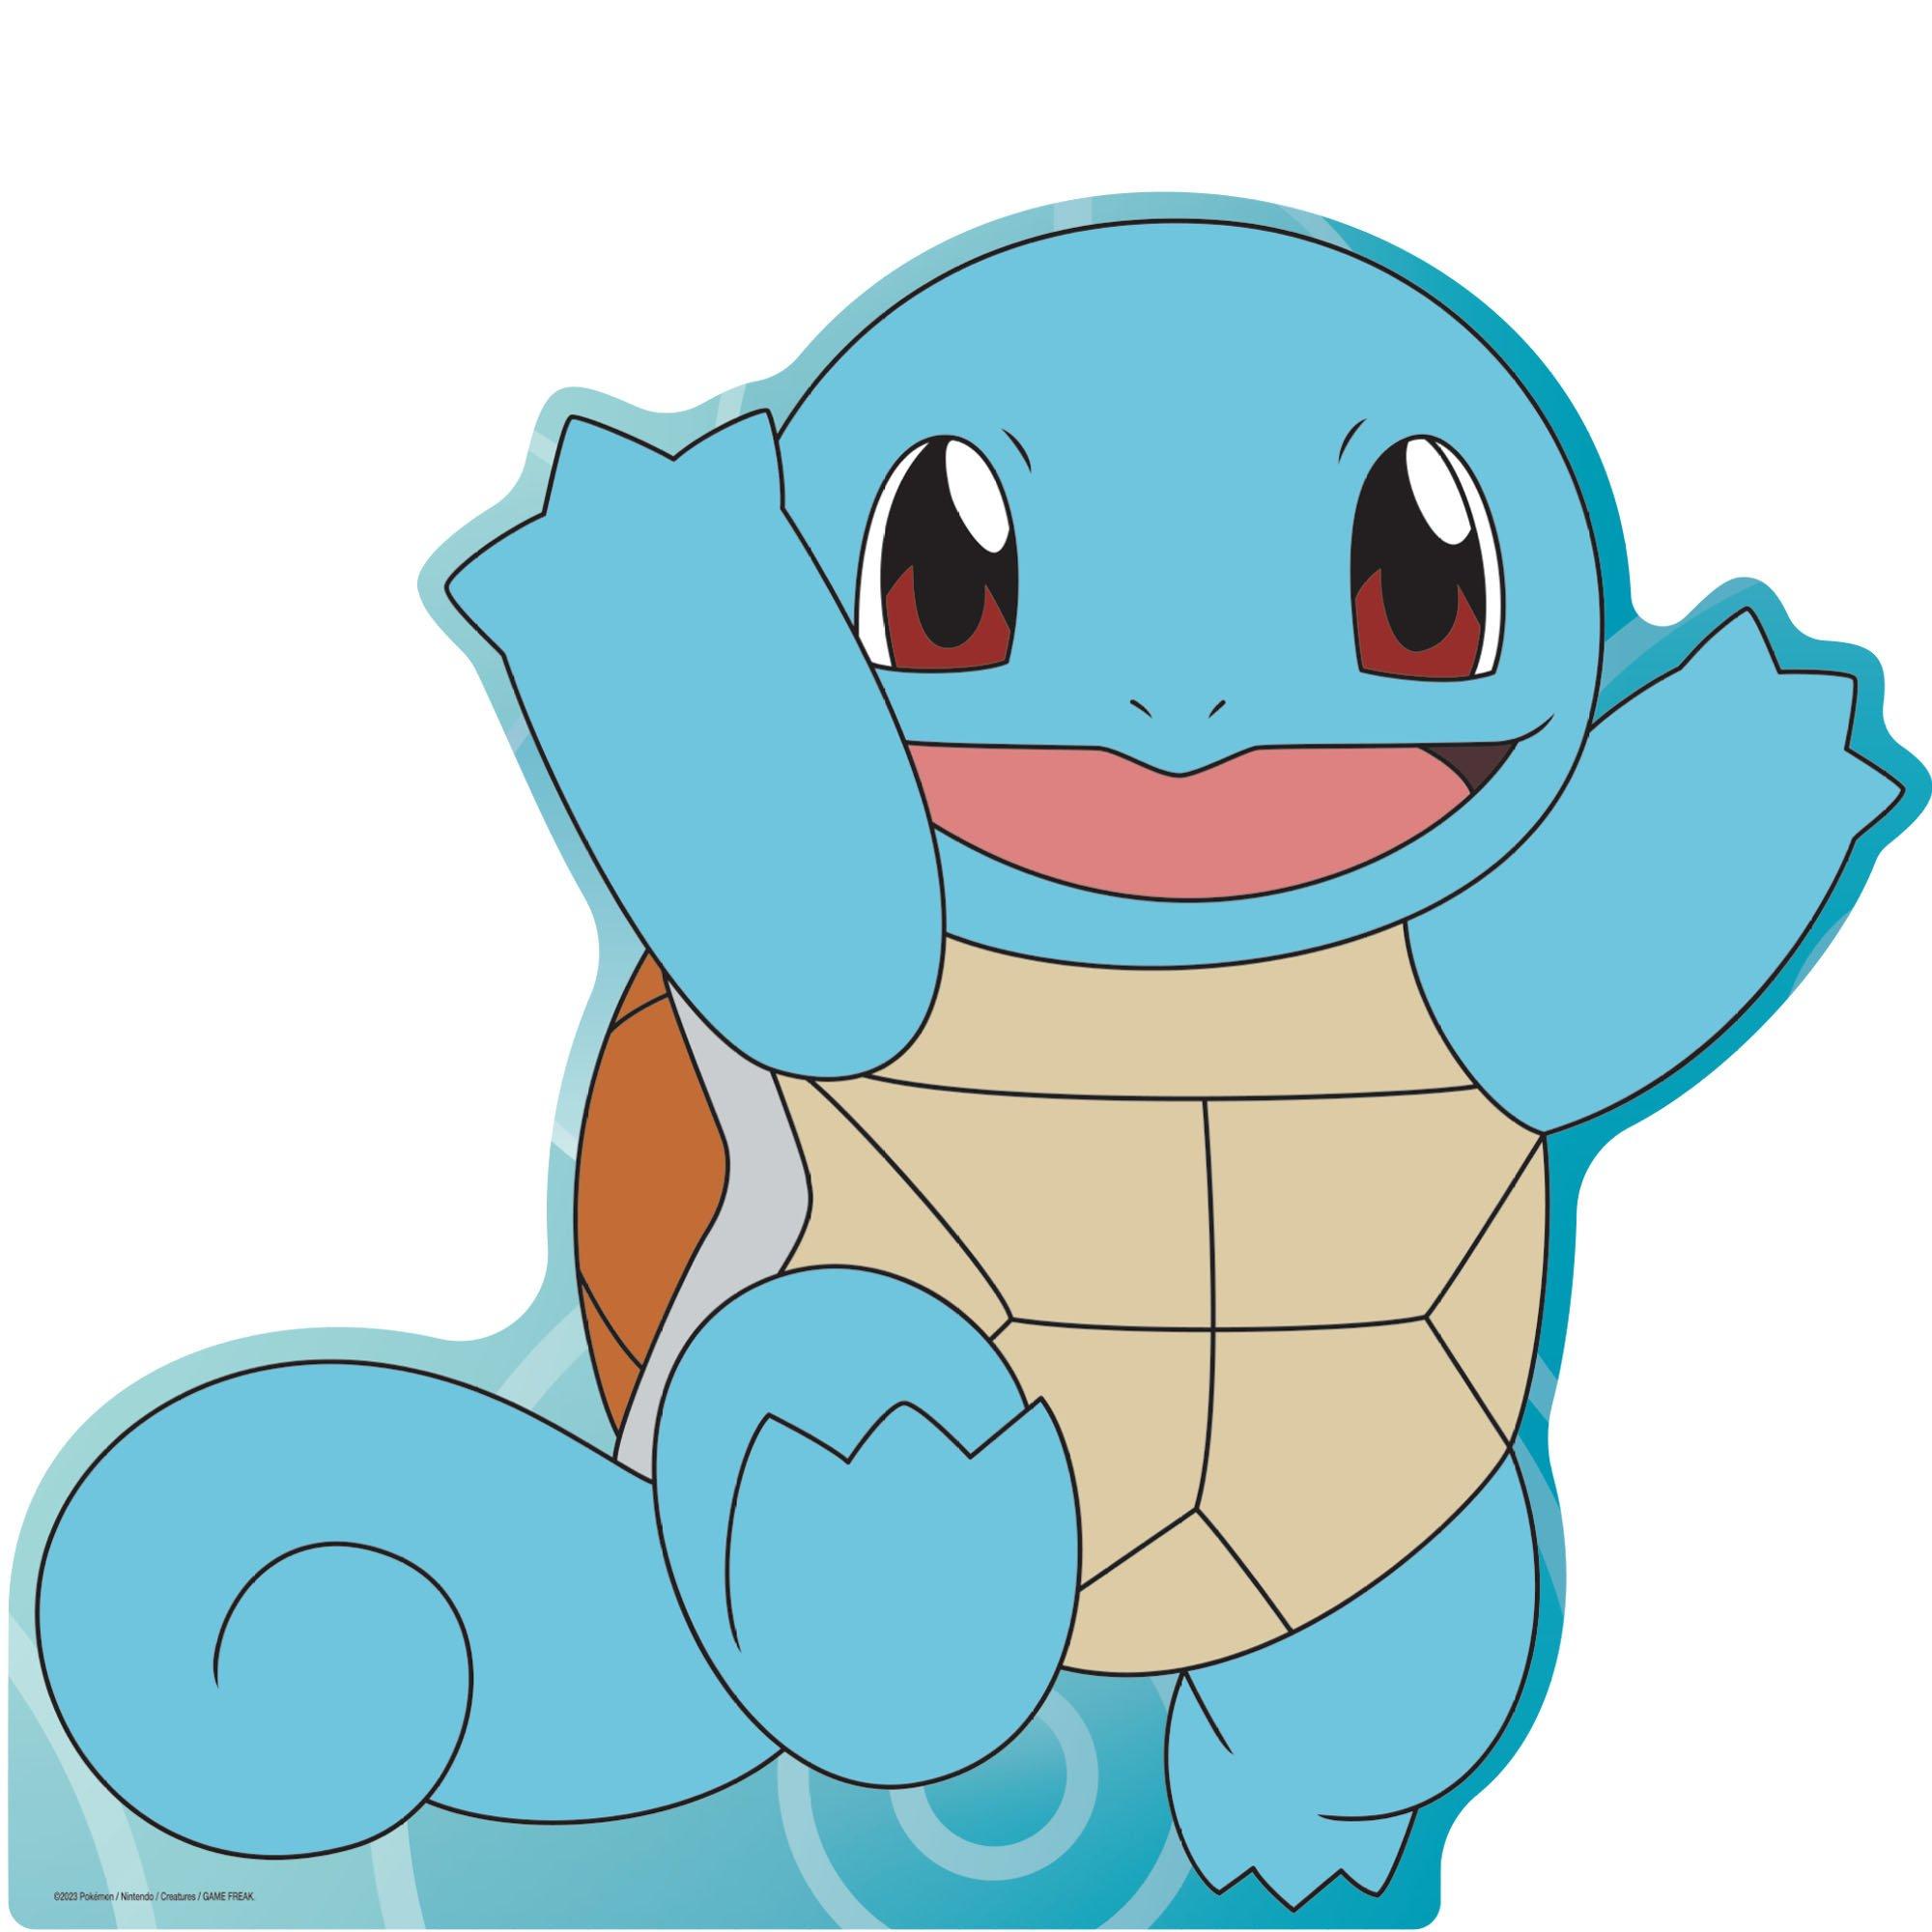 Squirtle Cardboard Cutout, 36in x 32.5in - Pokémon 